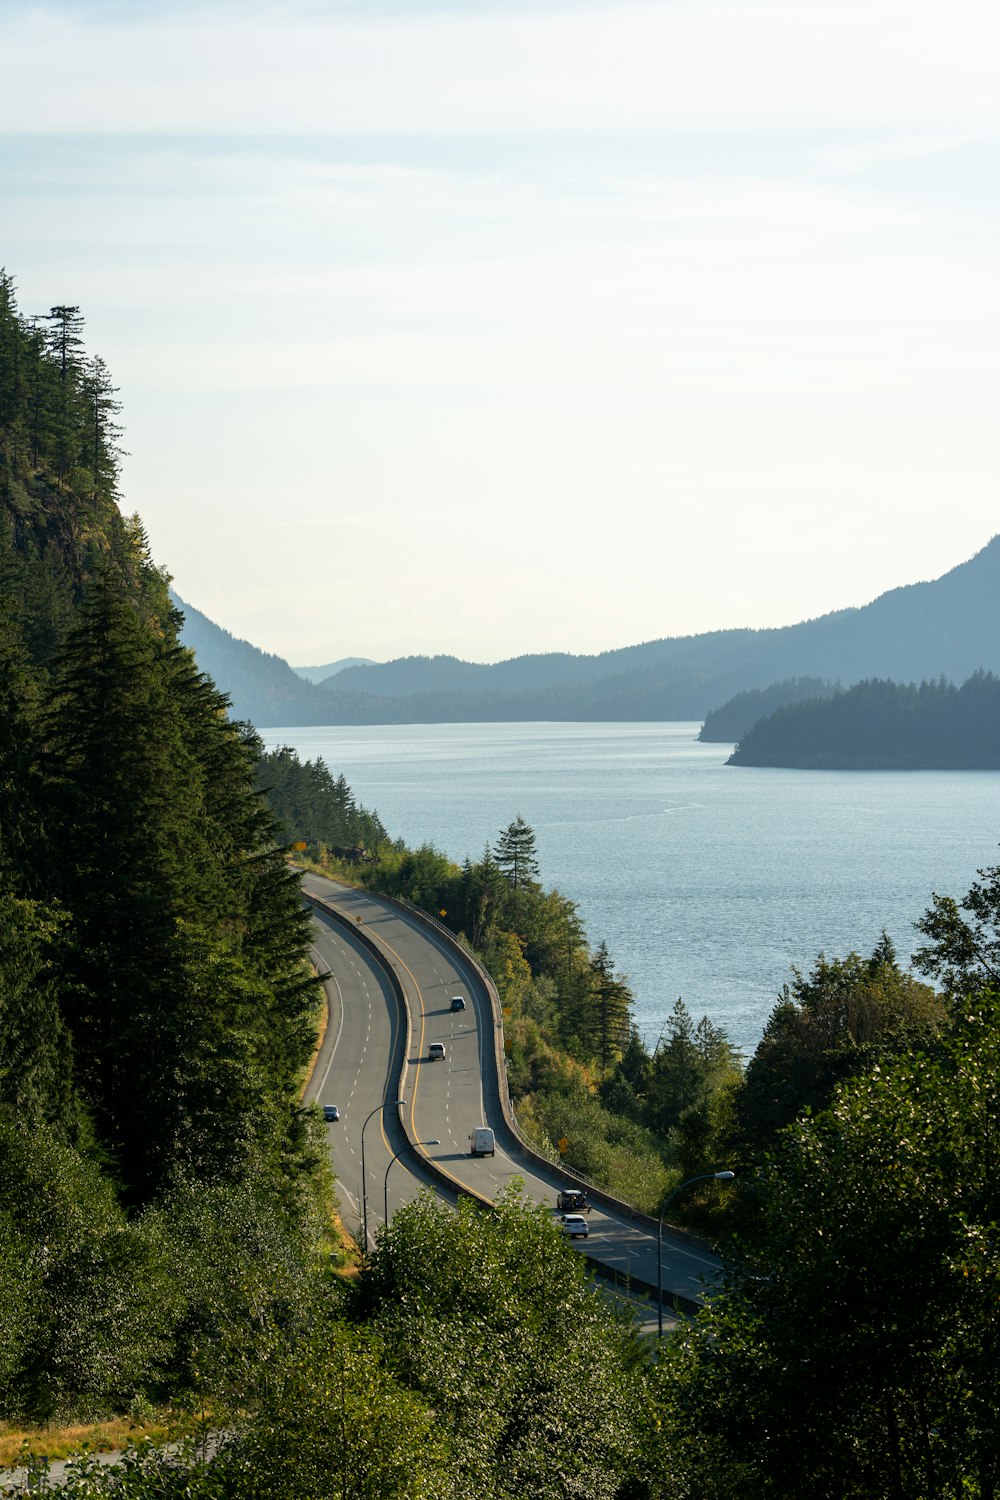 a highway with cars on it next to a body of water